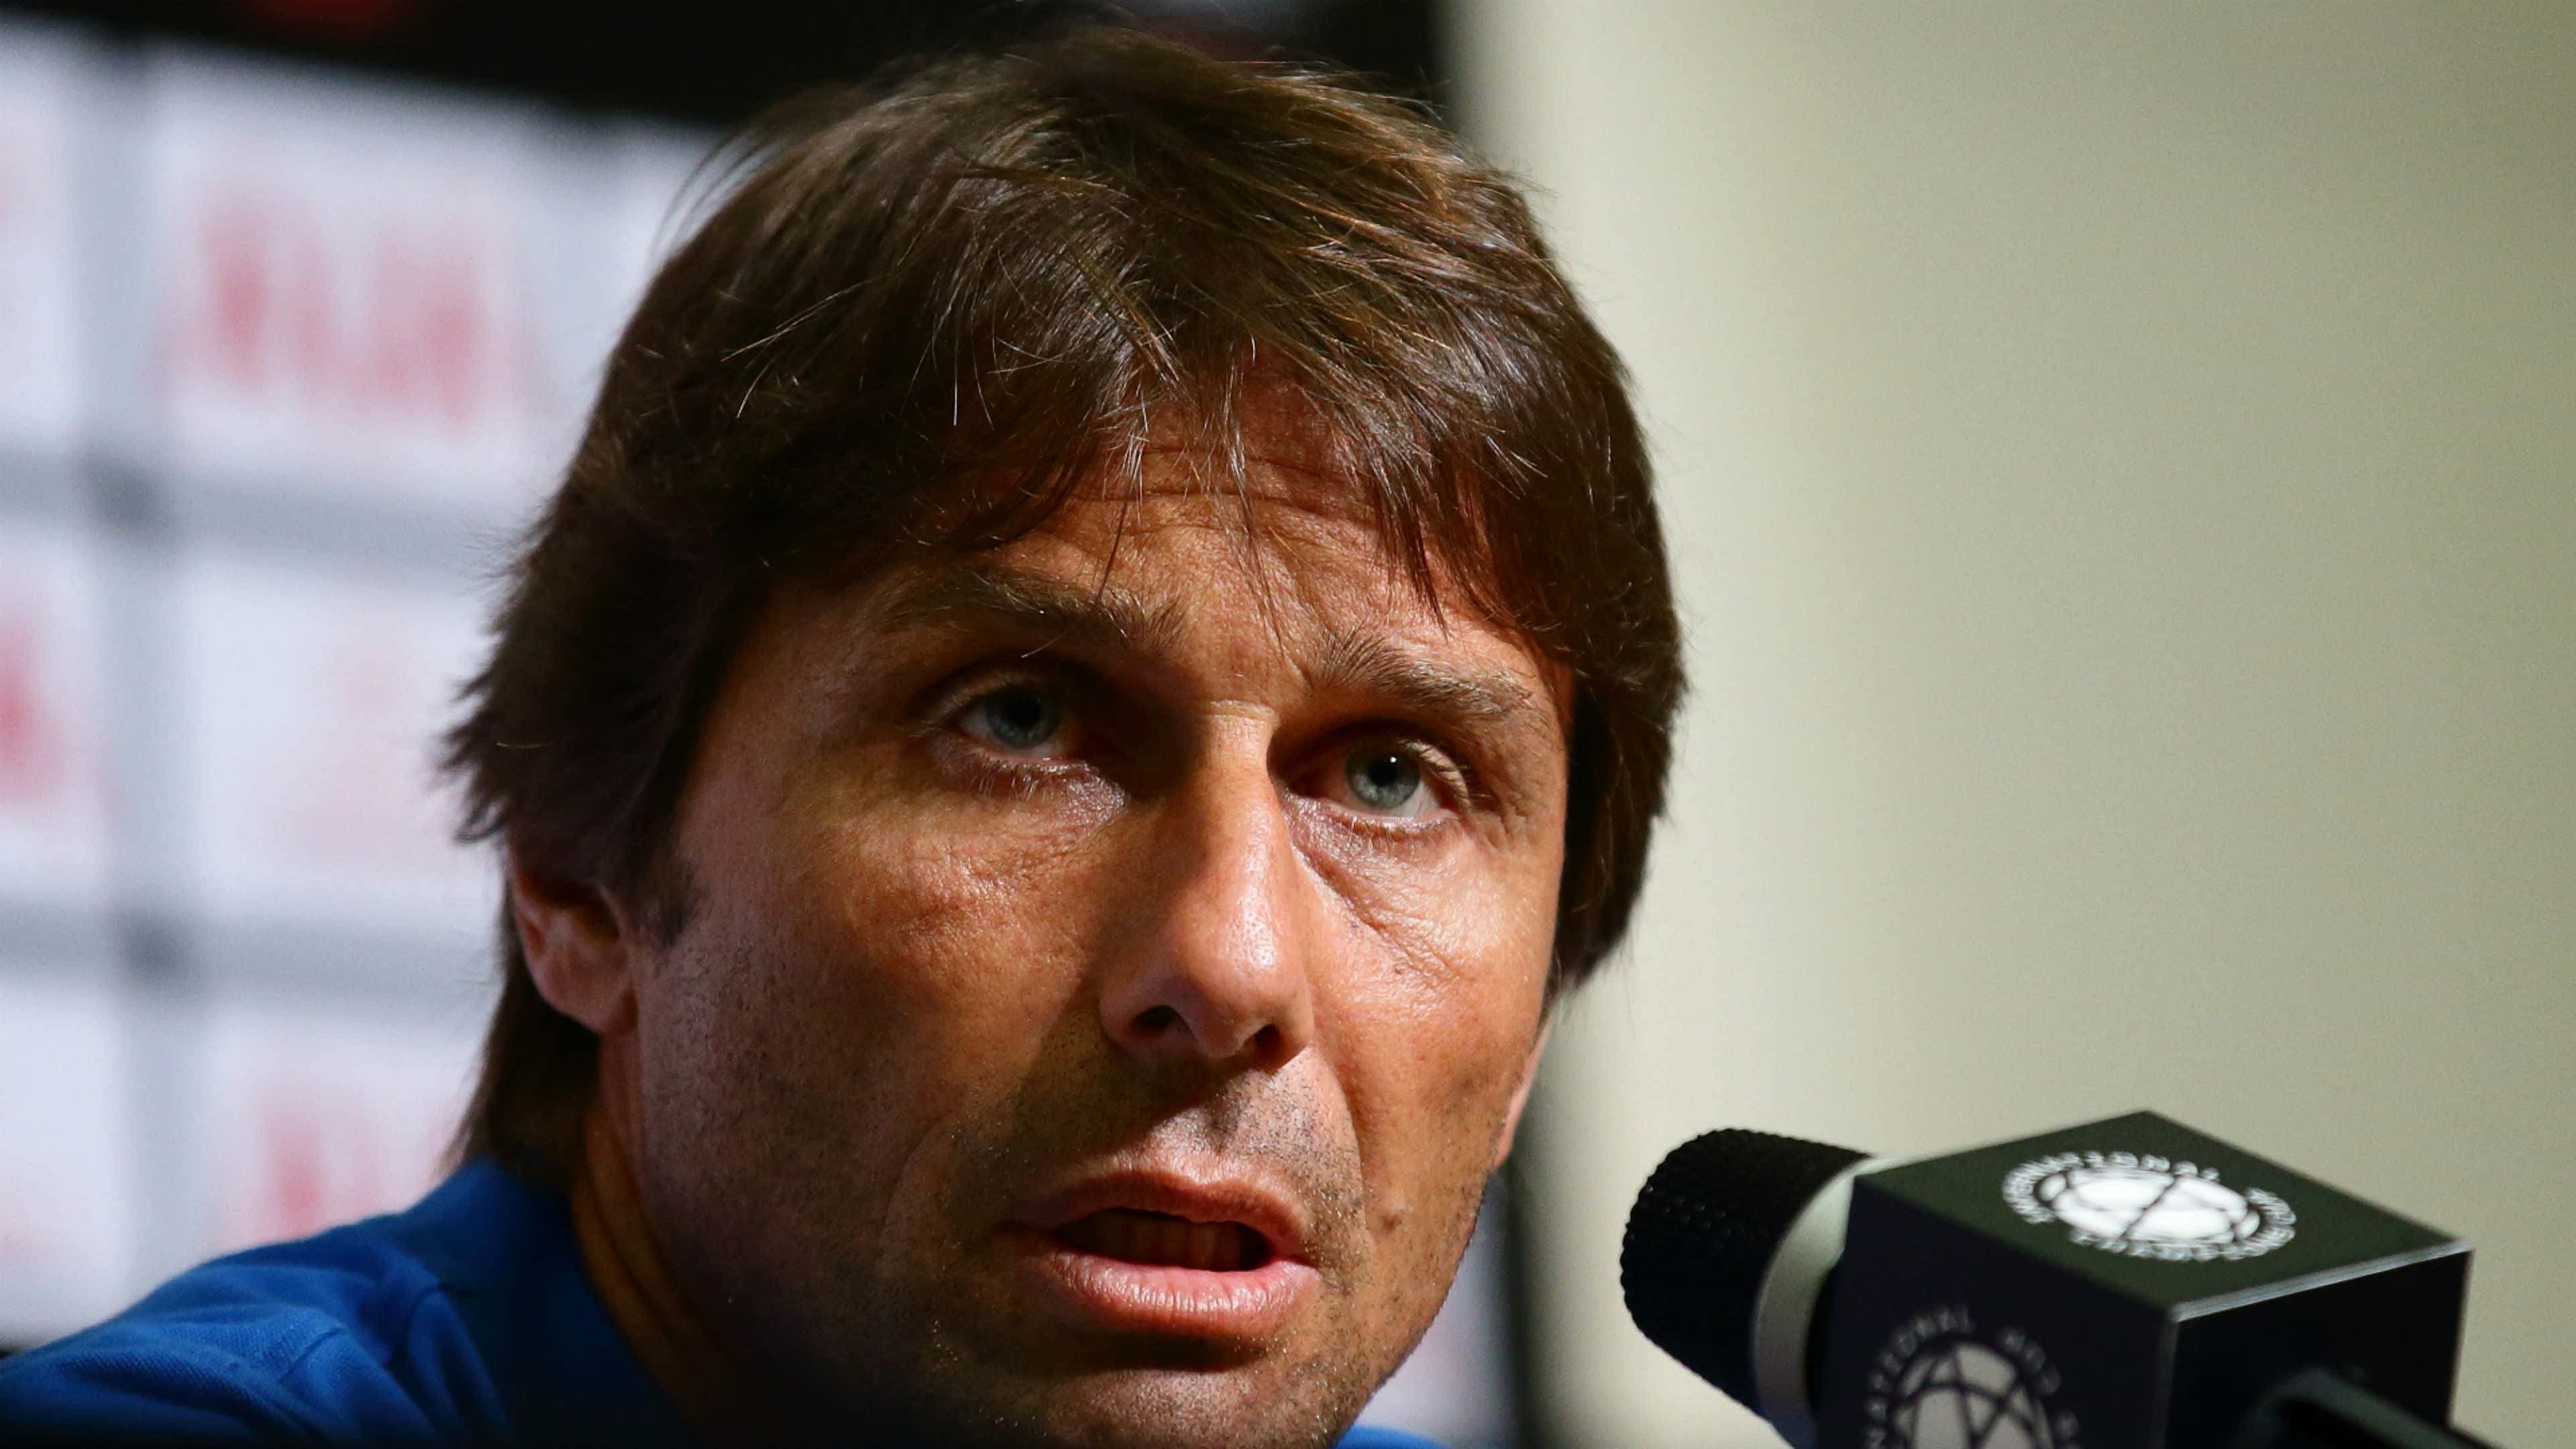 Conte hoping to bring down the Juventus side he helped created